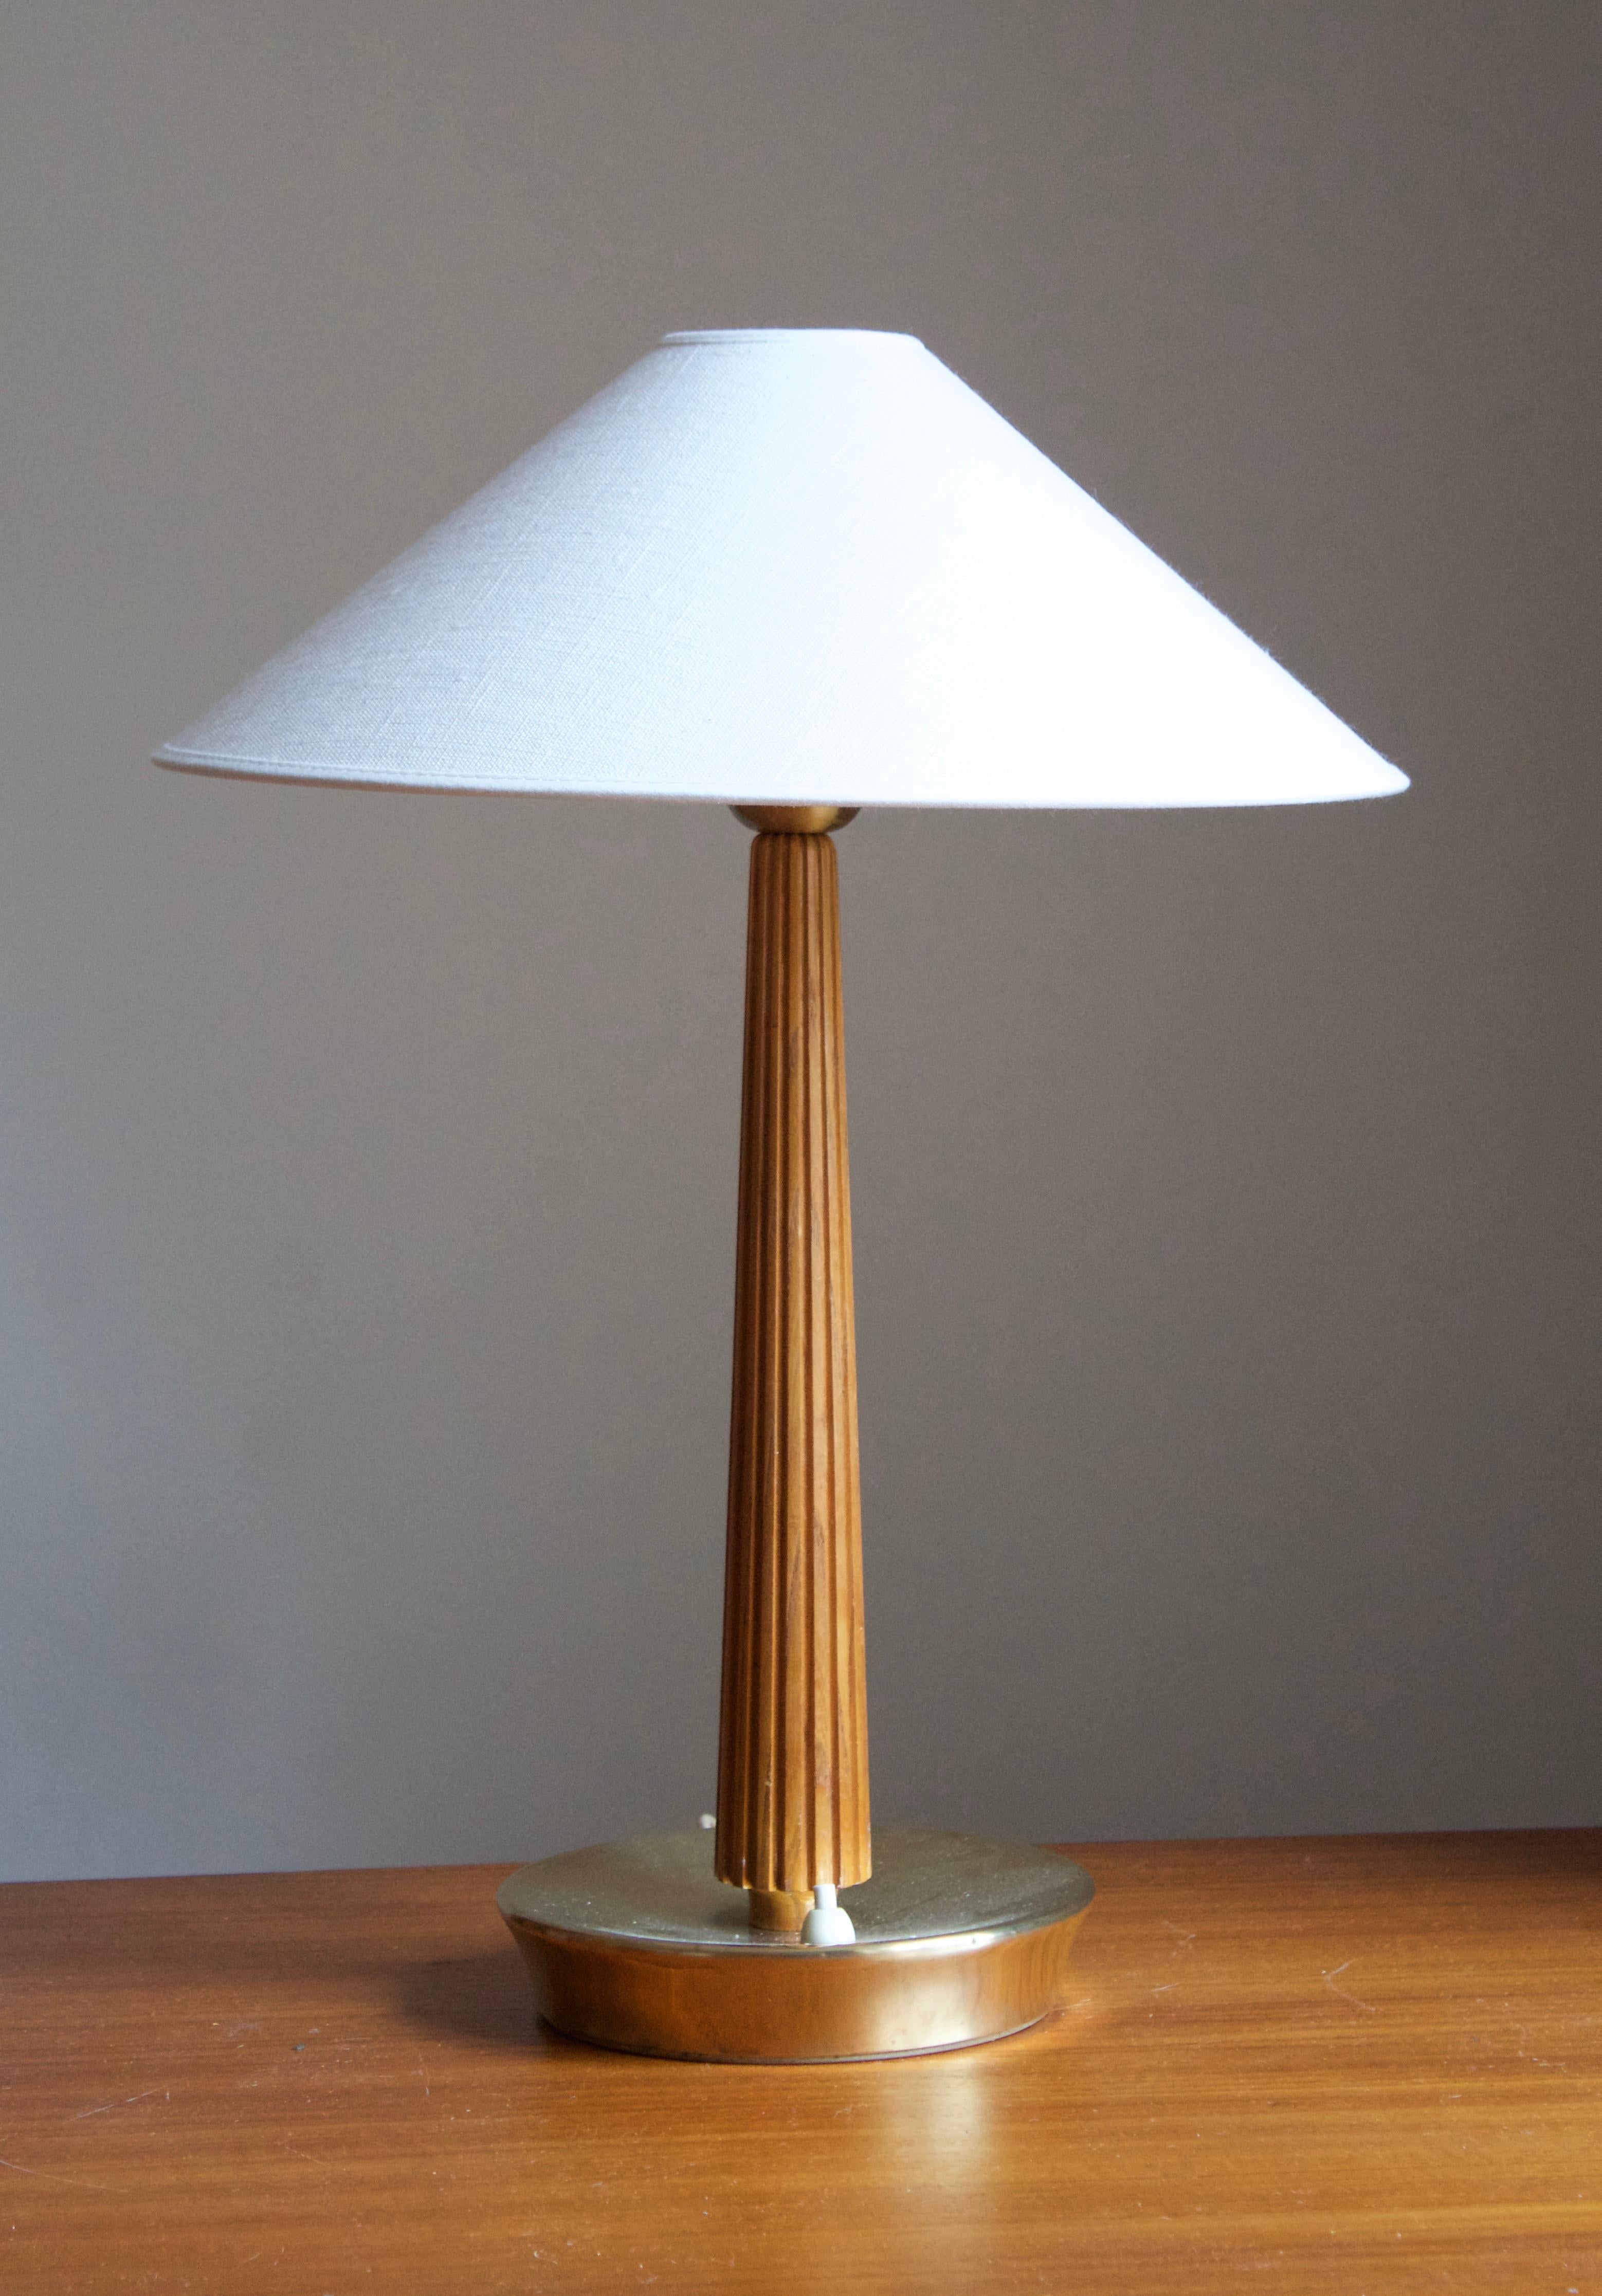 A table lamp / desk light. Designed by Swedish Hans Bergström. Produced by ASEA, Sweden, 1950s. Stamped.

Stated dimensions exclude lampshades. Height includes sockets. Sold without lampshade.